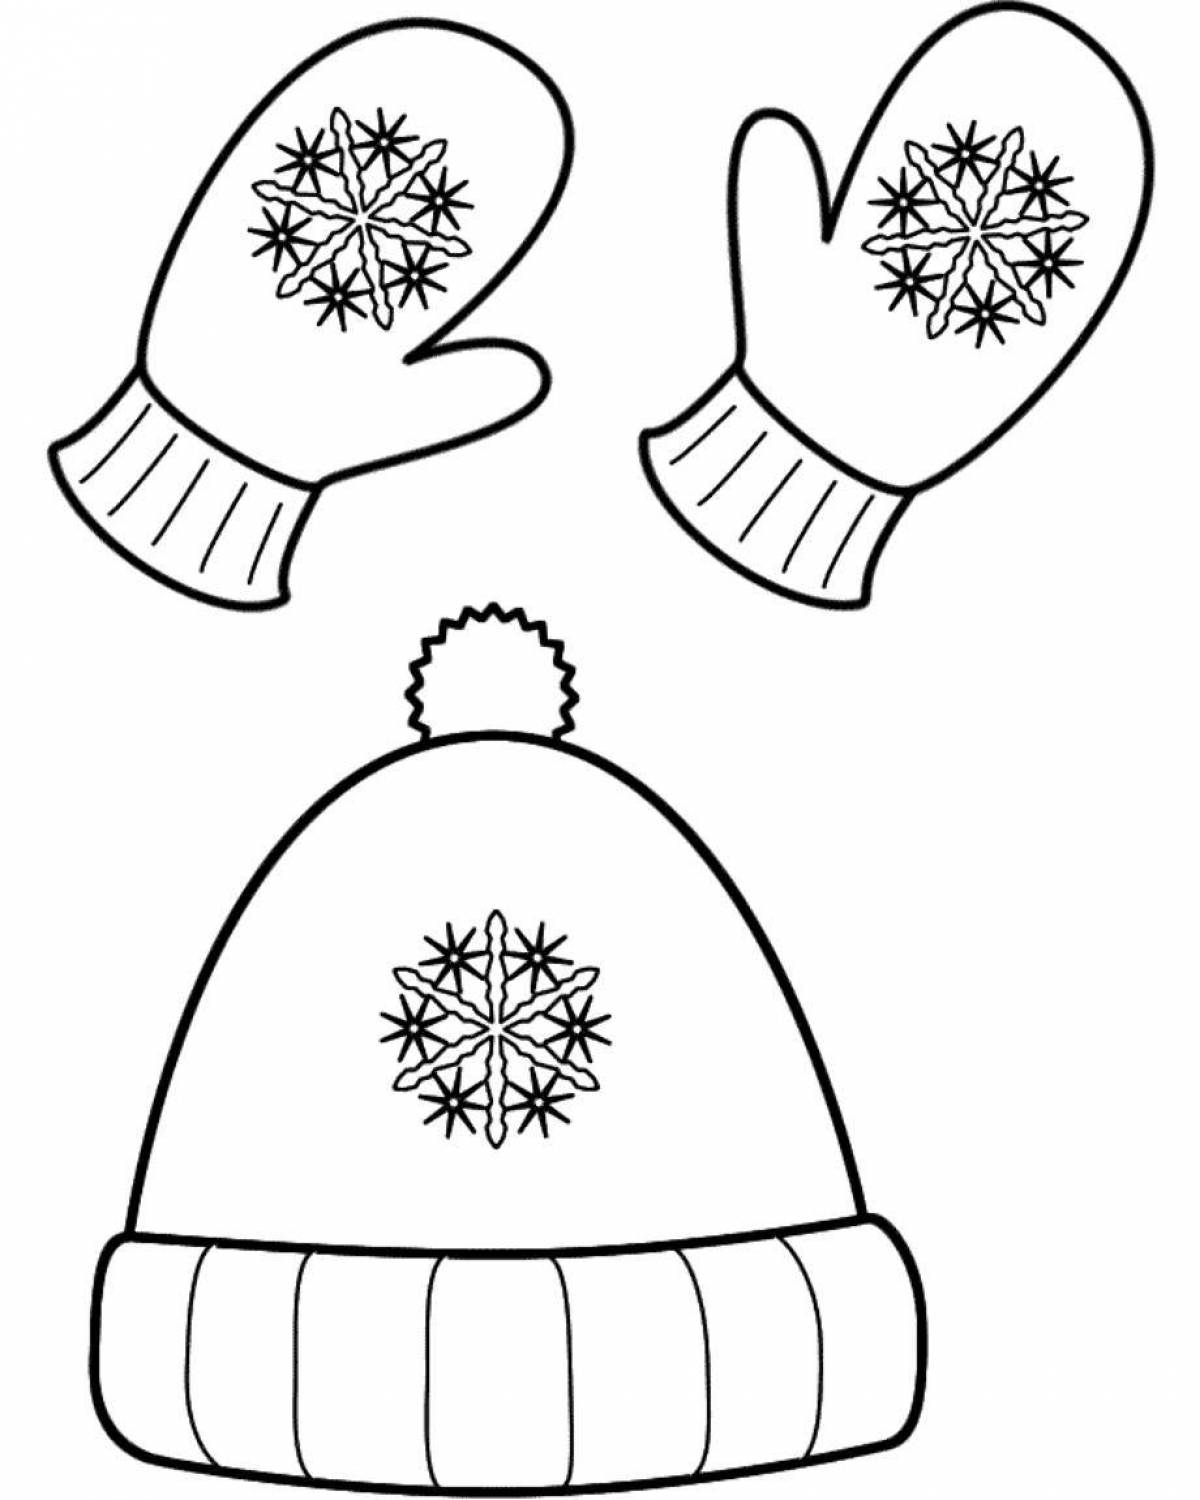 Coloring book joyful mittens for children 4-5 years old